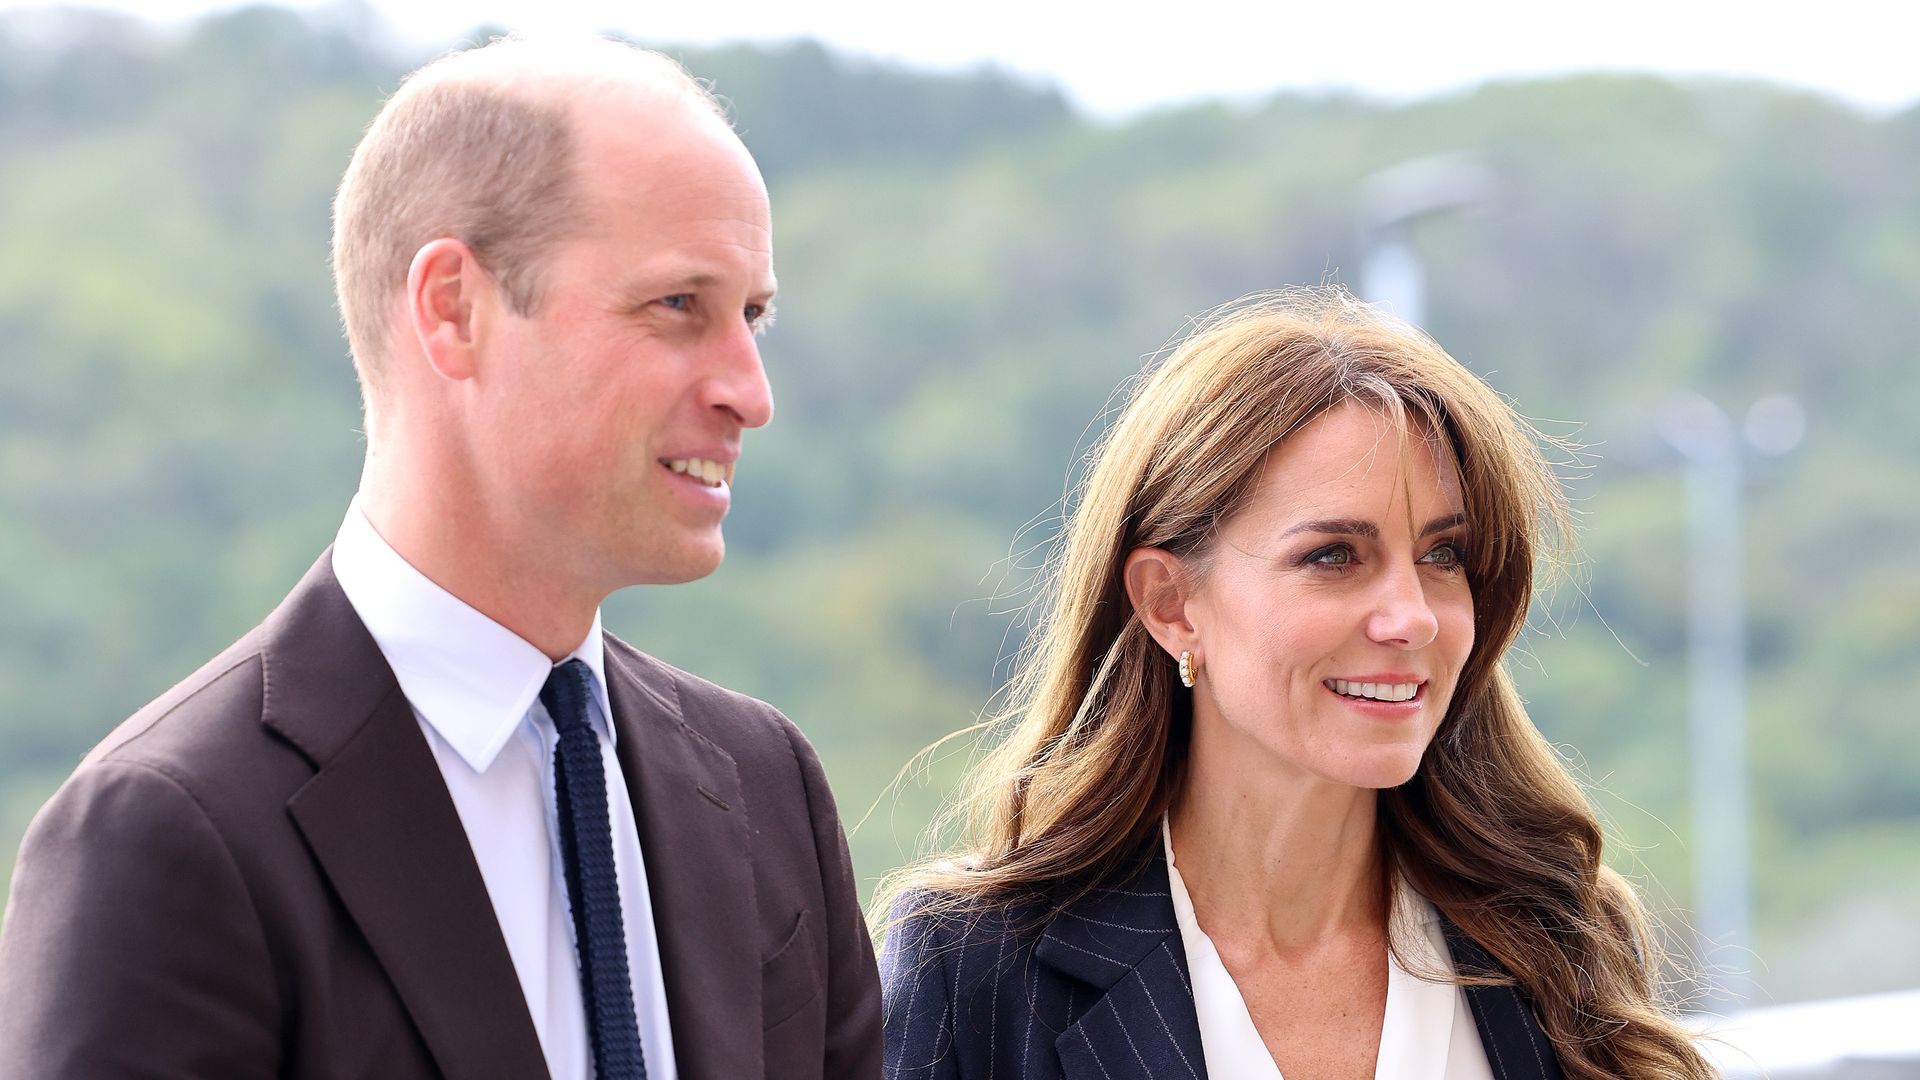 Mental health campaigner praises Prince William and Kate Middleton's